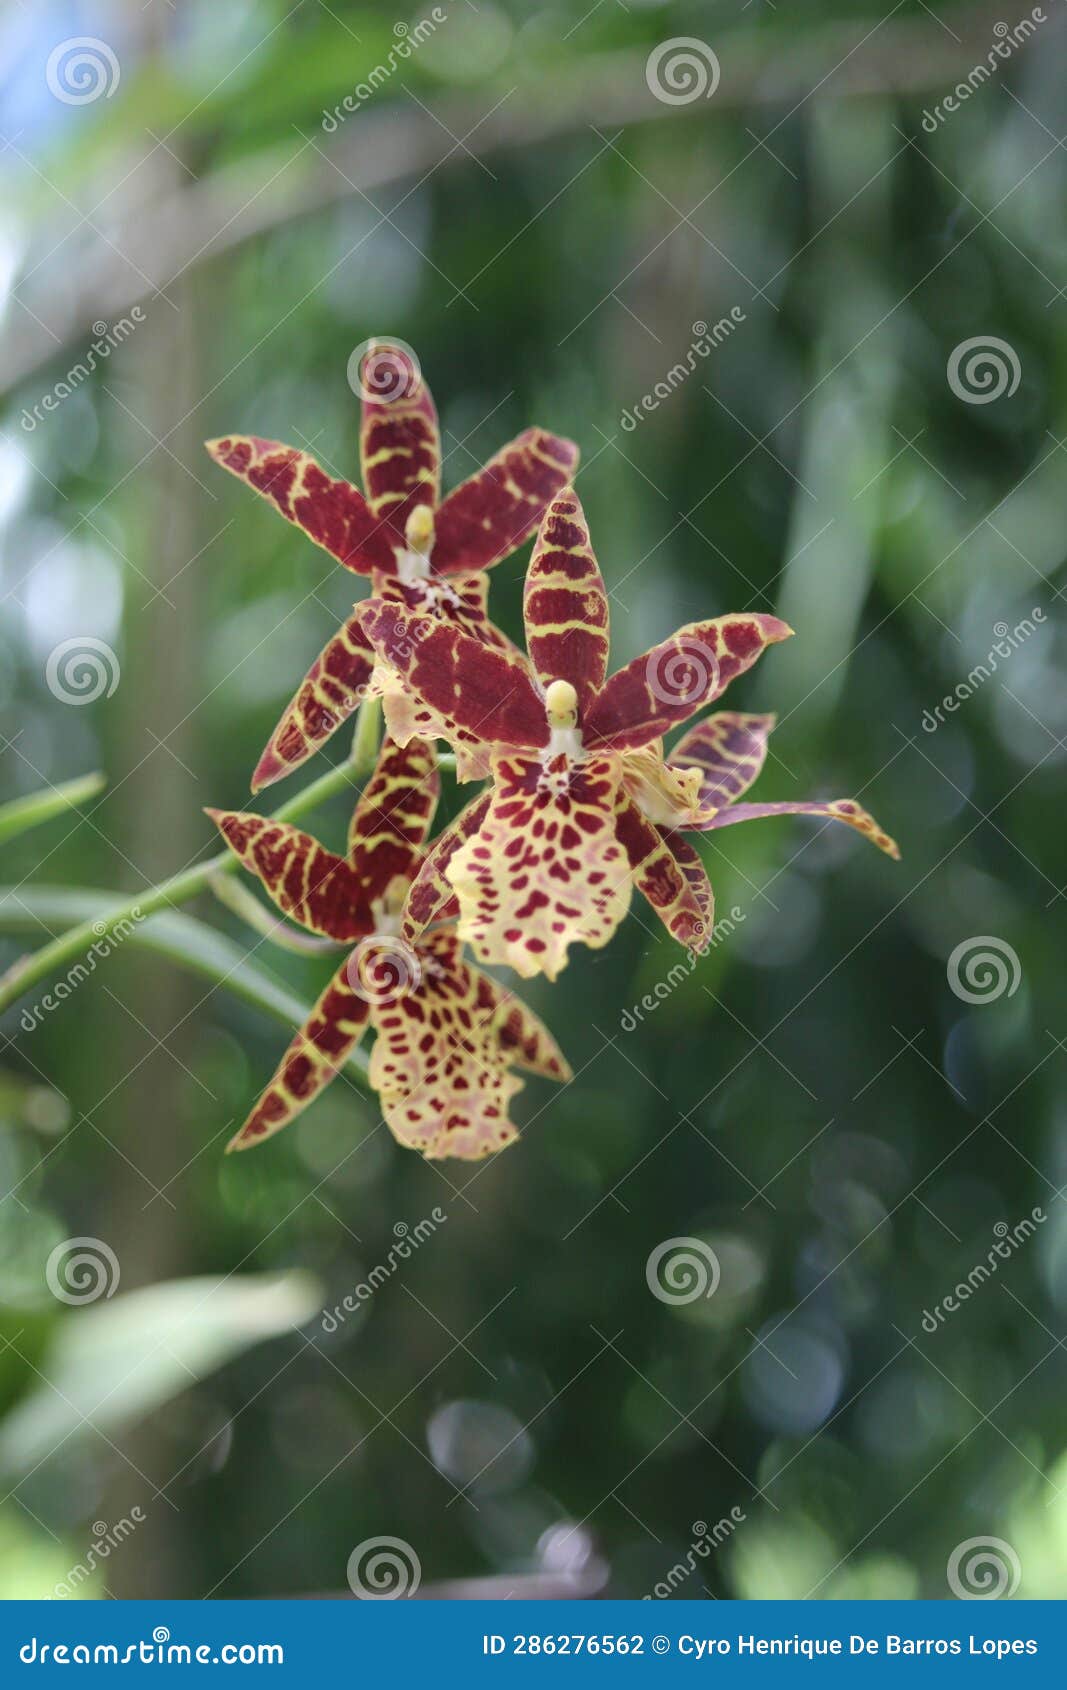 african ansellia details photo, ansellia africana, african species, leopard orchid, introduced ornamental species